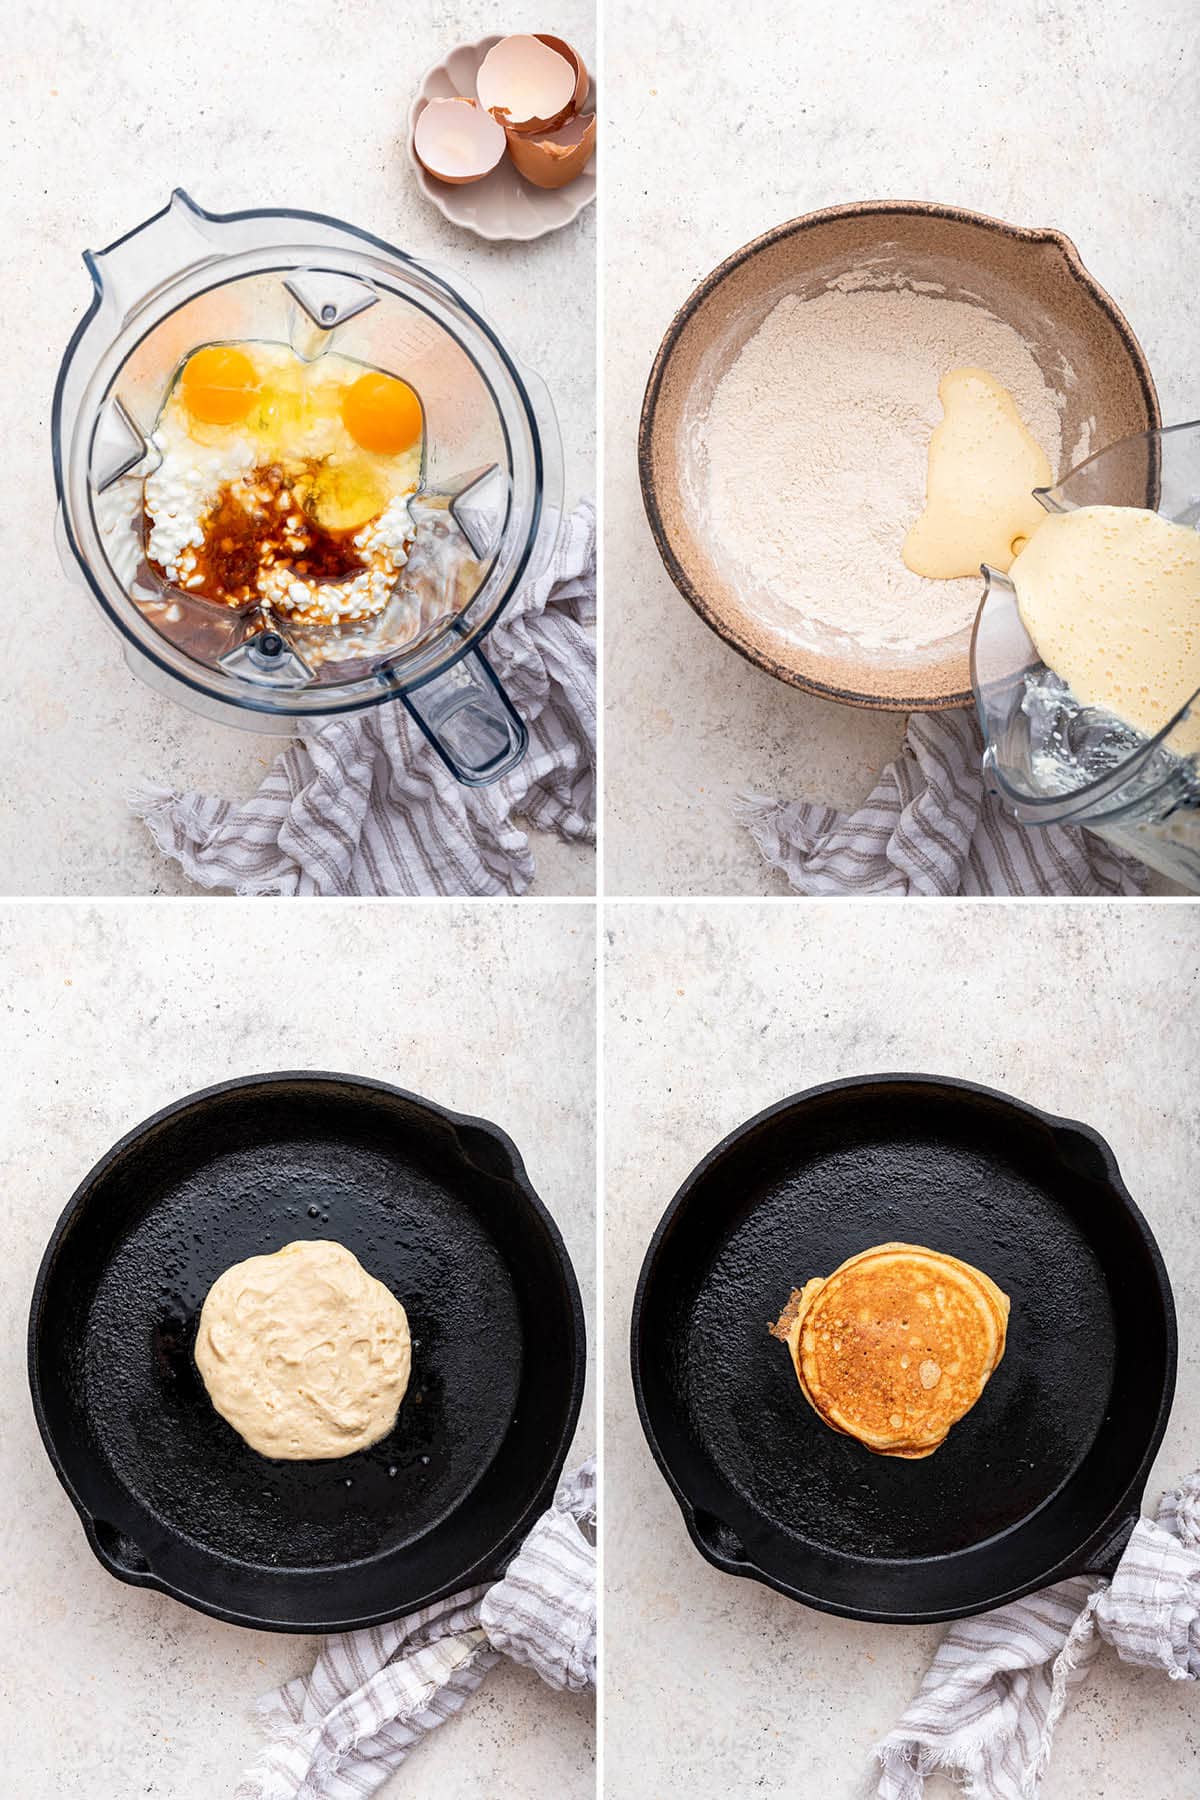 Four photos showing the steps to make Cottage Cheese Pancakes: mixing batter and then cooking pancakes in skillet.